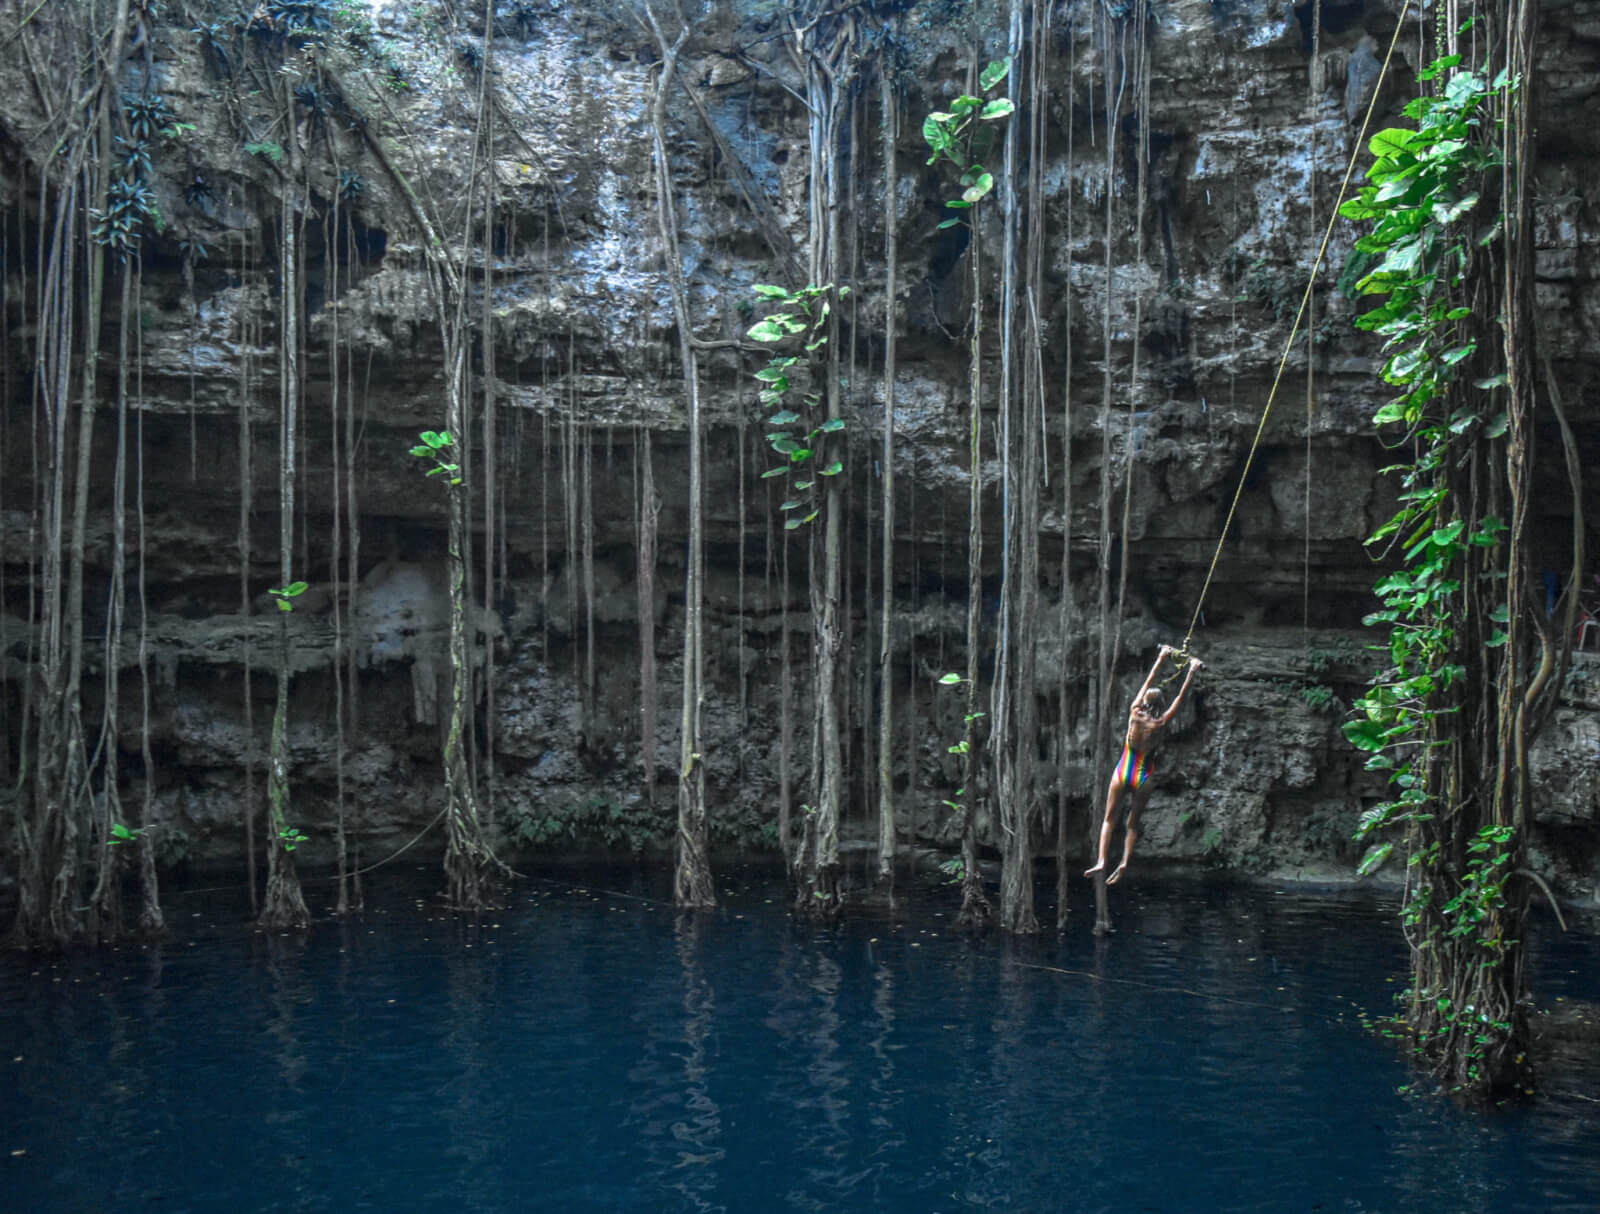 Hayley swinging on a rope swing in a cenote